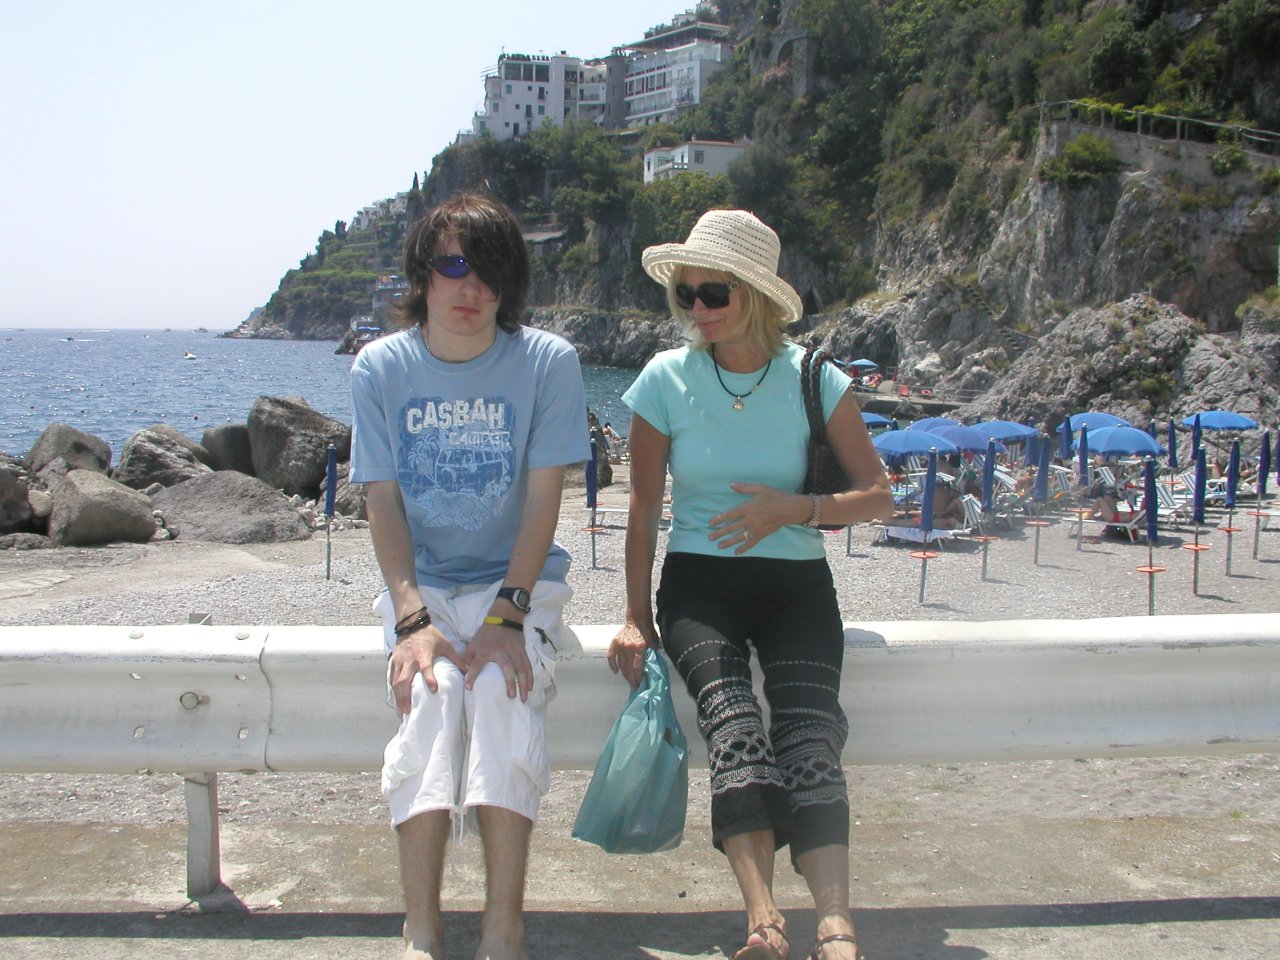 JPEG image - Amalfi : just a bit hot after walking round the town. ...